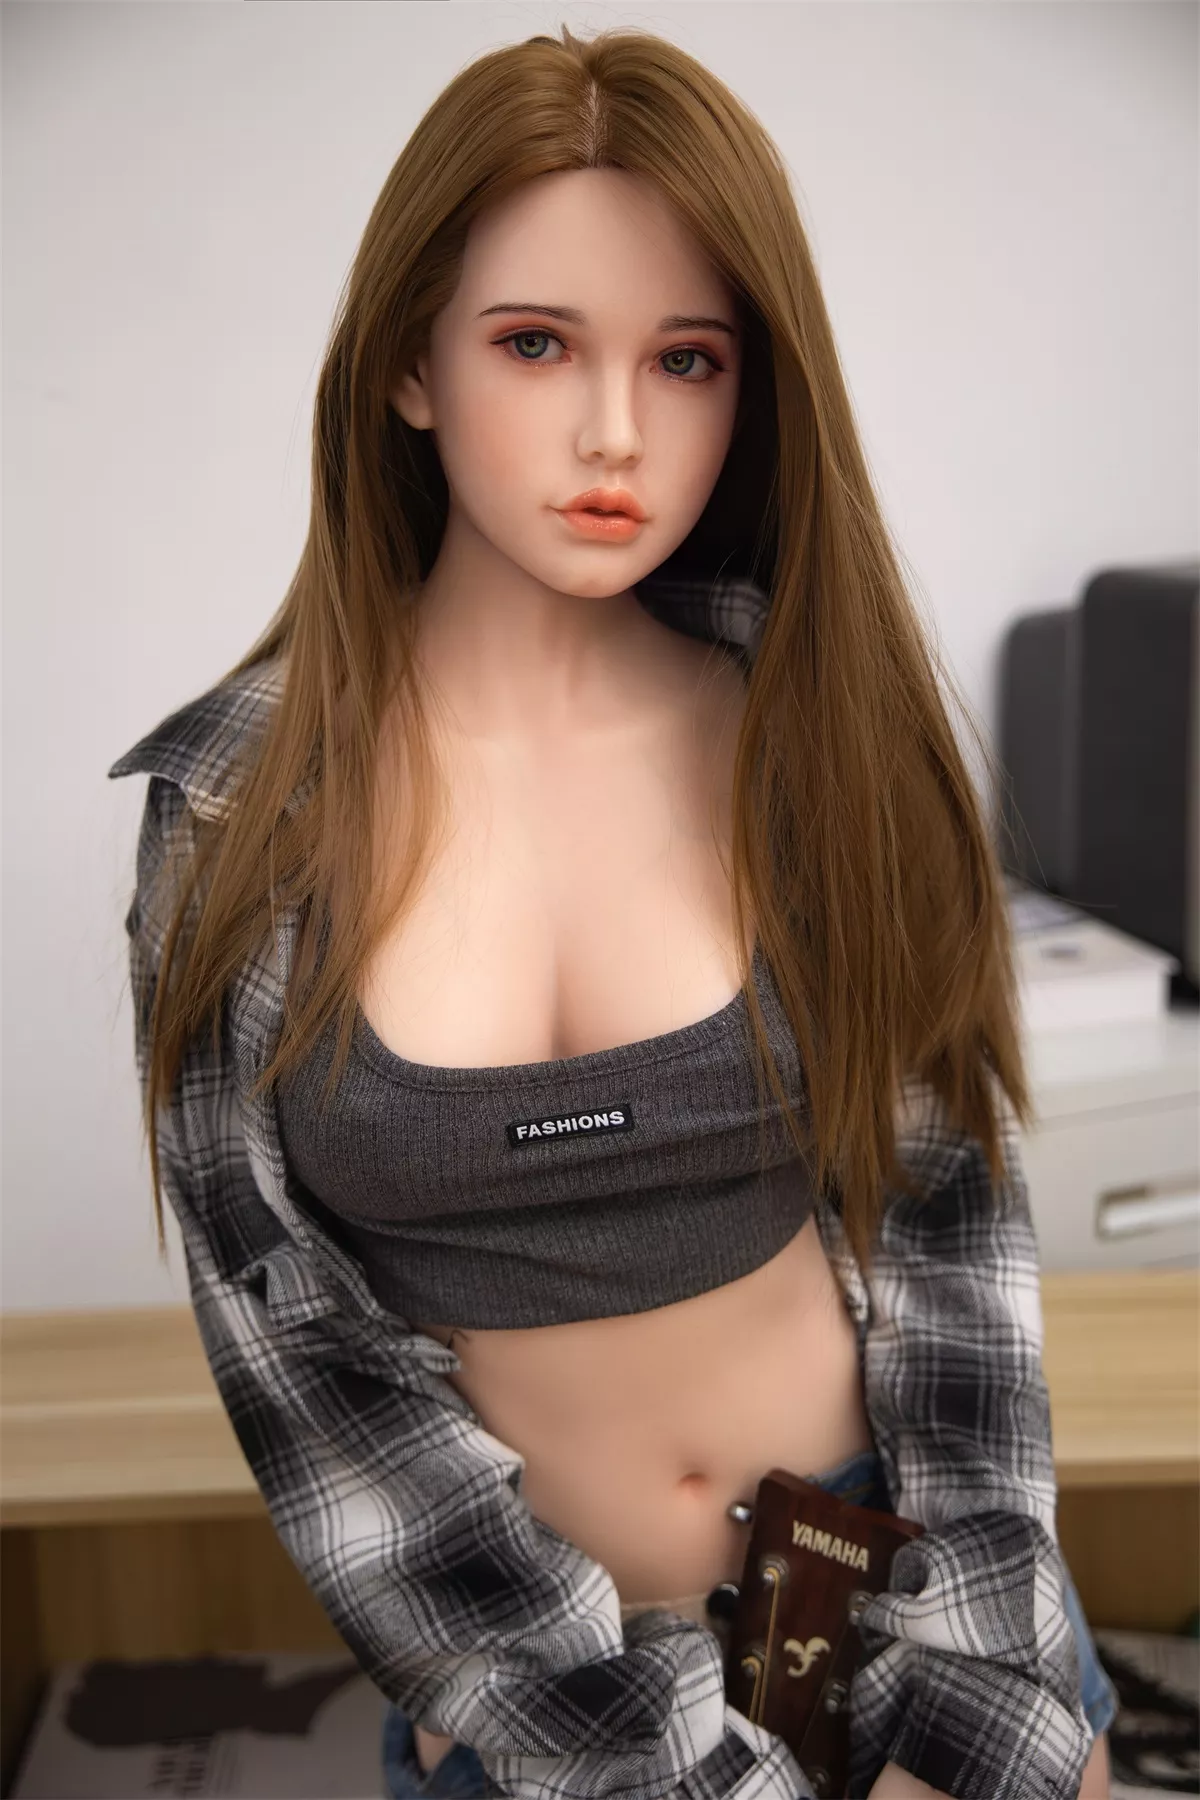 Clover - Big Boobs Sexy Realistic Silicone Sex Doll With Blonde Hair (5 Sizes)